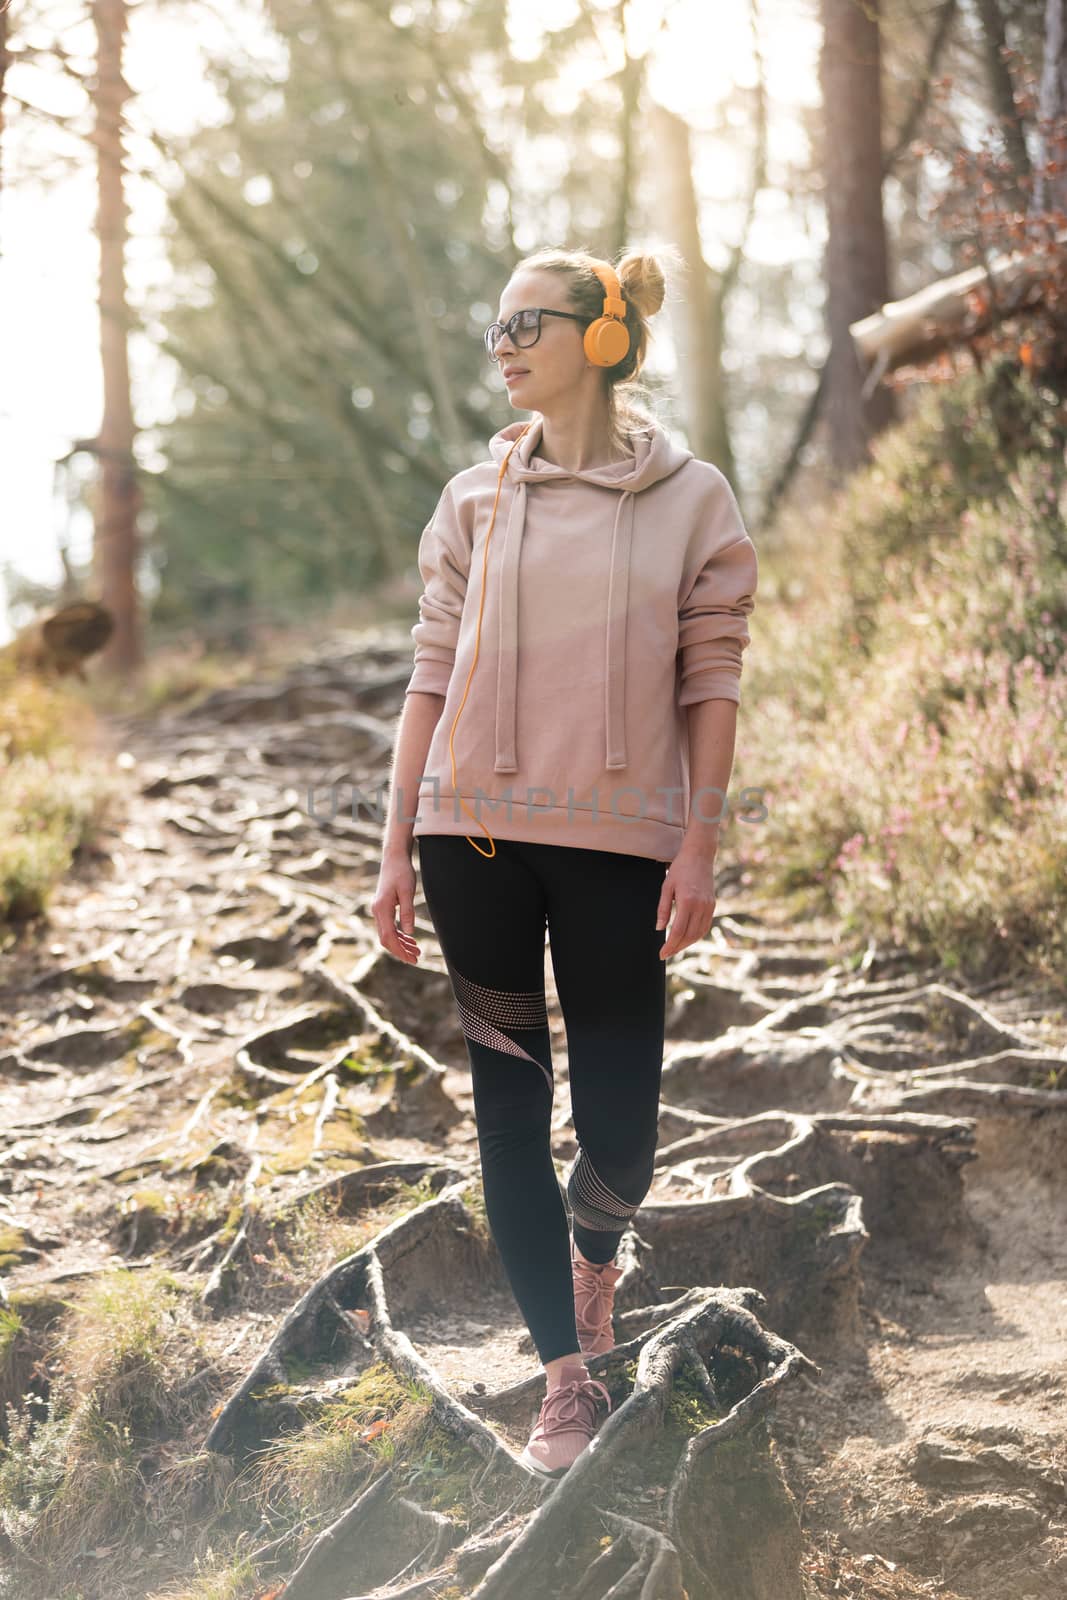 Active sporty woman listening to the music while hiking in autumn fall forest. Female jogger training outdoor. Healthy lifestyle image of young caucasian woman walking on hiking trail in nature.